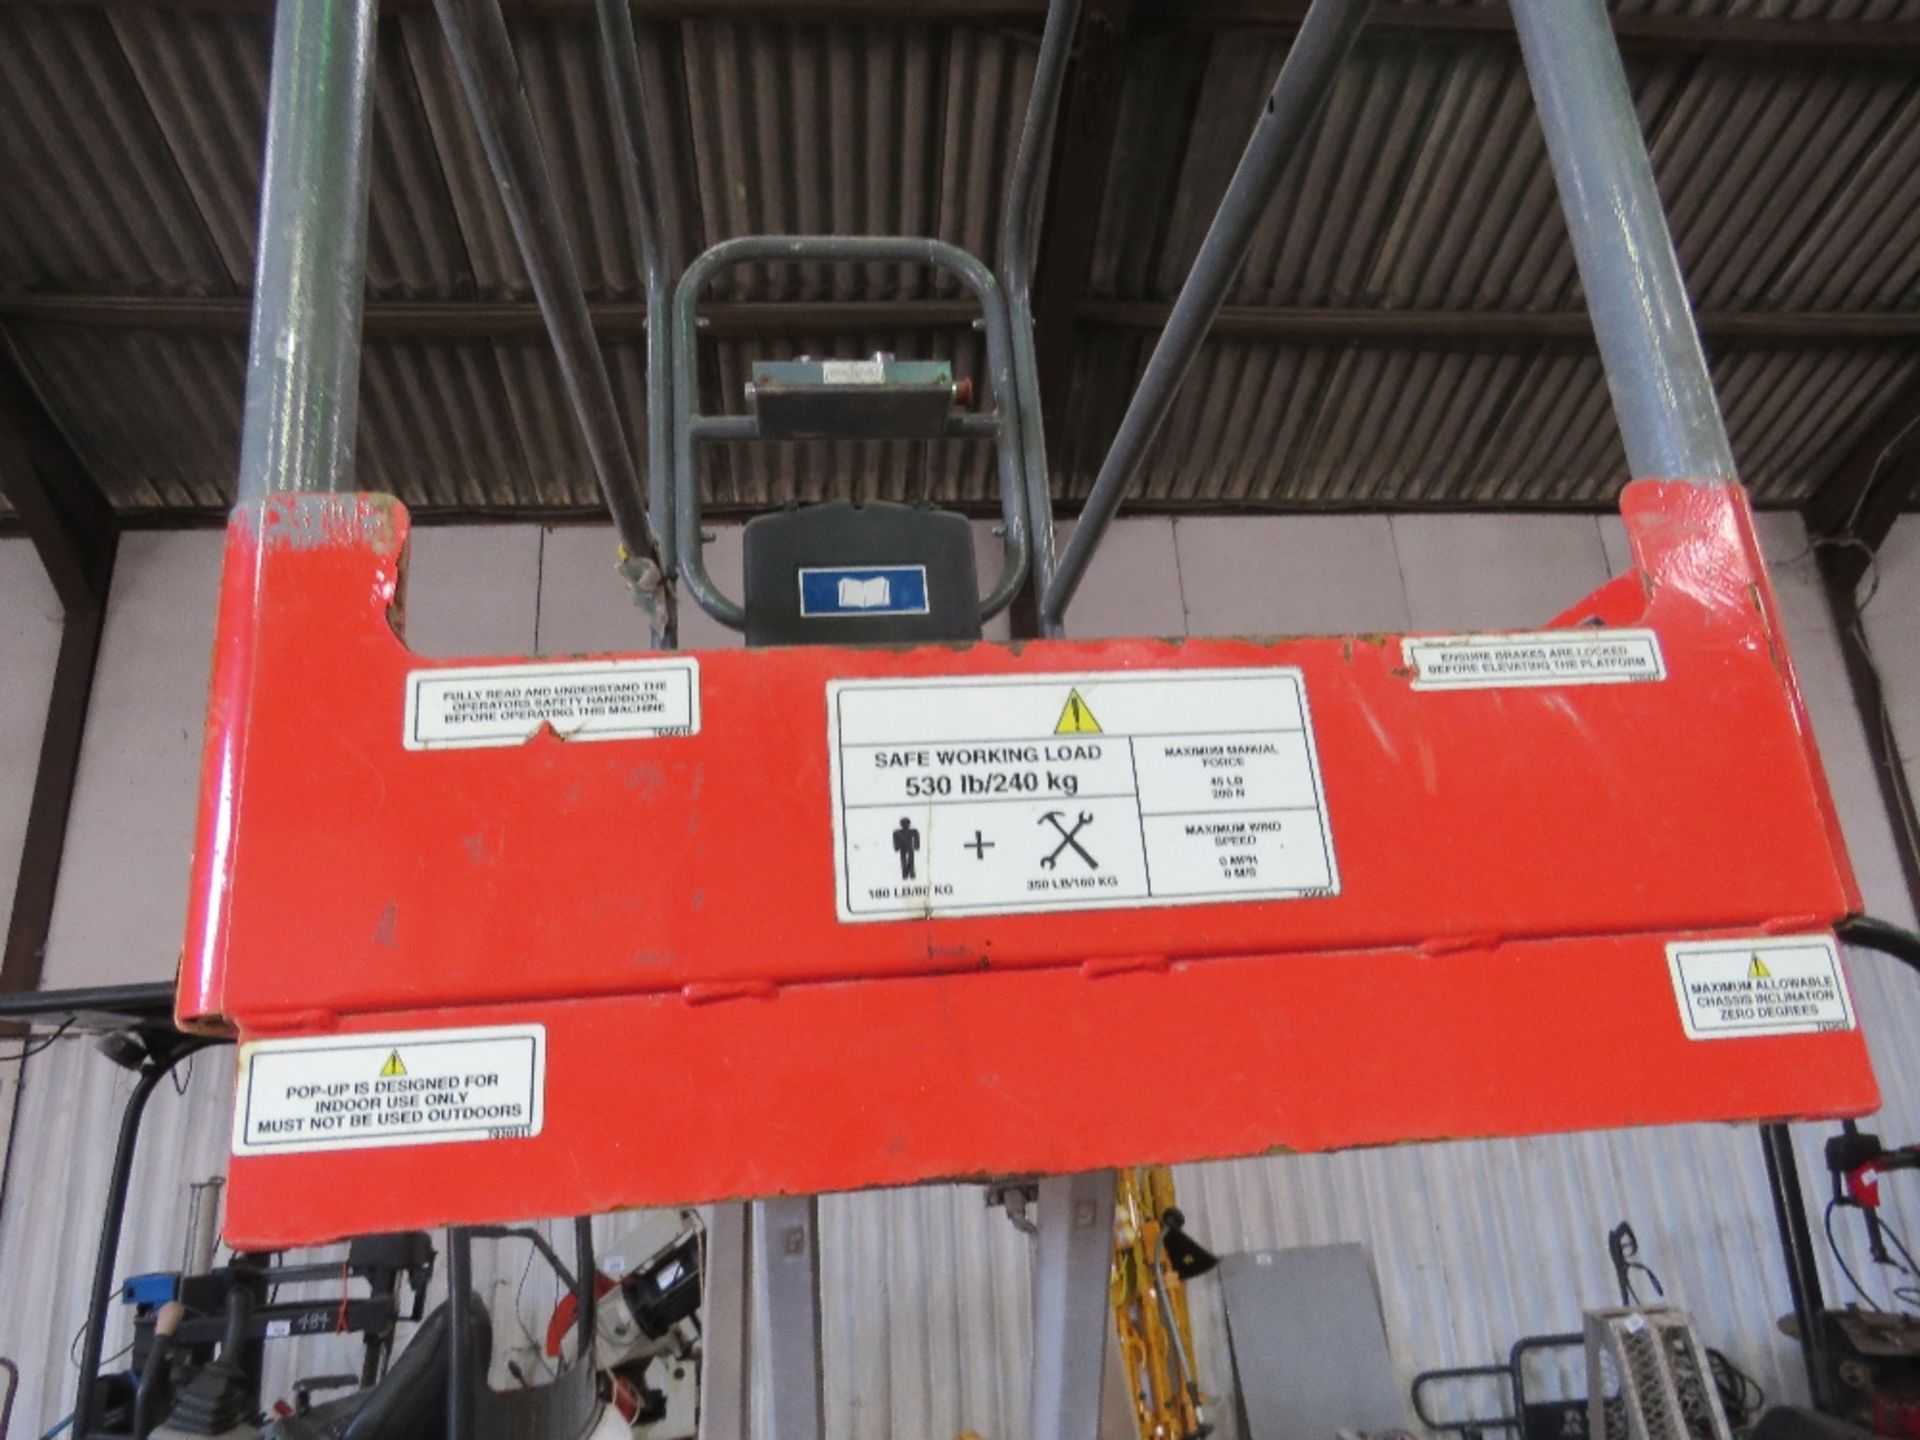 POPUP PUSH 6 PRO SCISSOR ACCESS LIFT. WHNE TESTED WAS SEEN TO LIFT AND LOWER. - Image 10 of 10